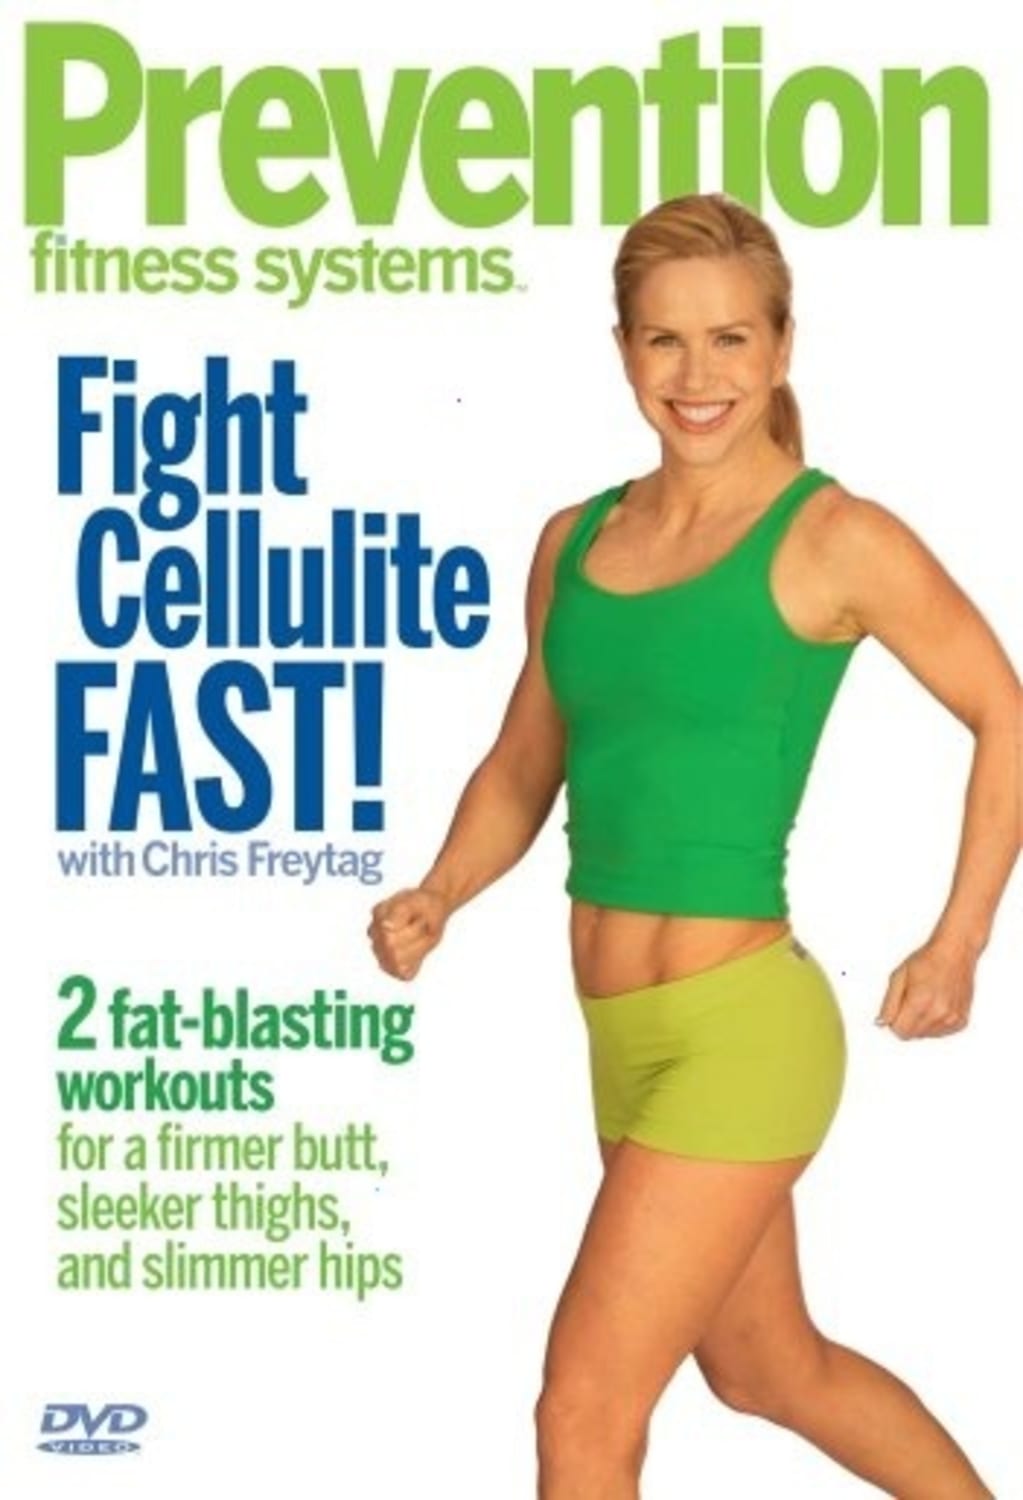 Prevention Fitness Systems – Fight Cellulite Fast! (DVD) on MovieShack